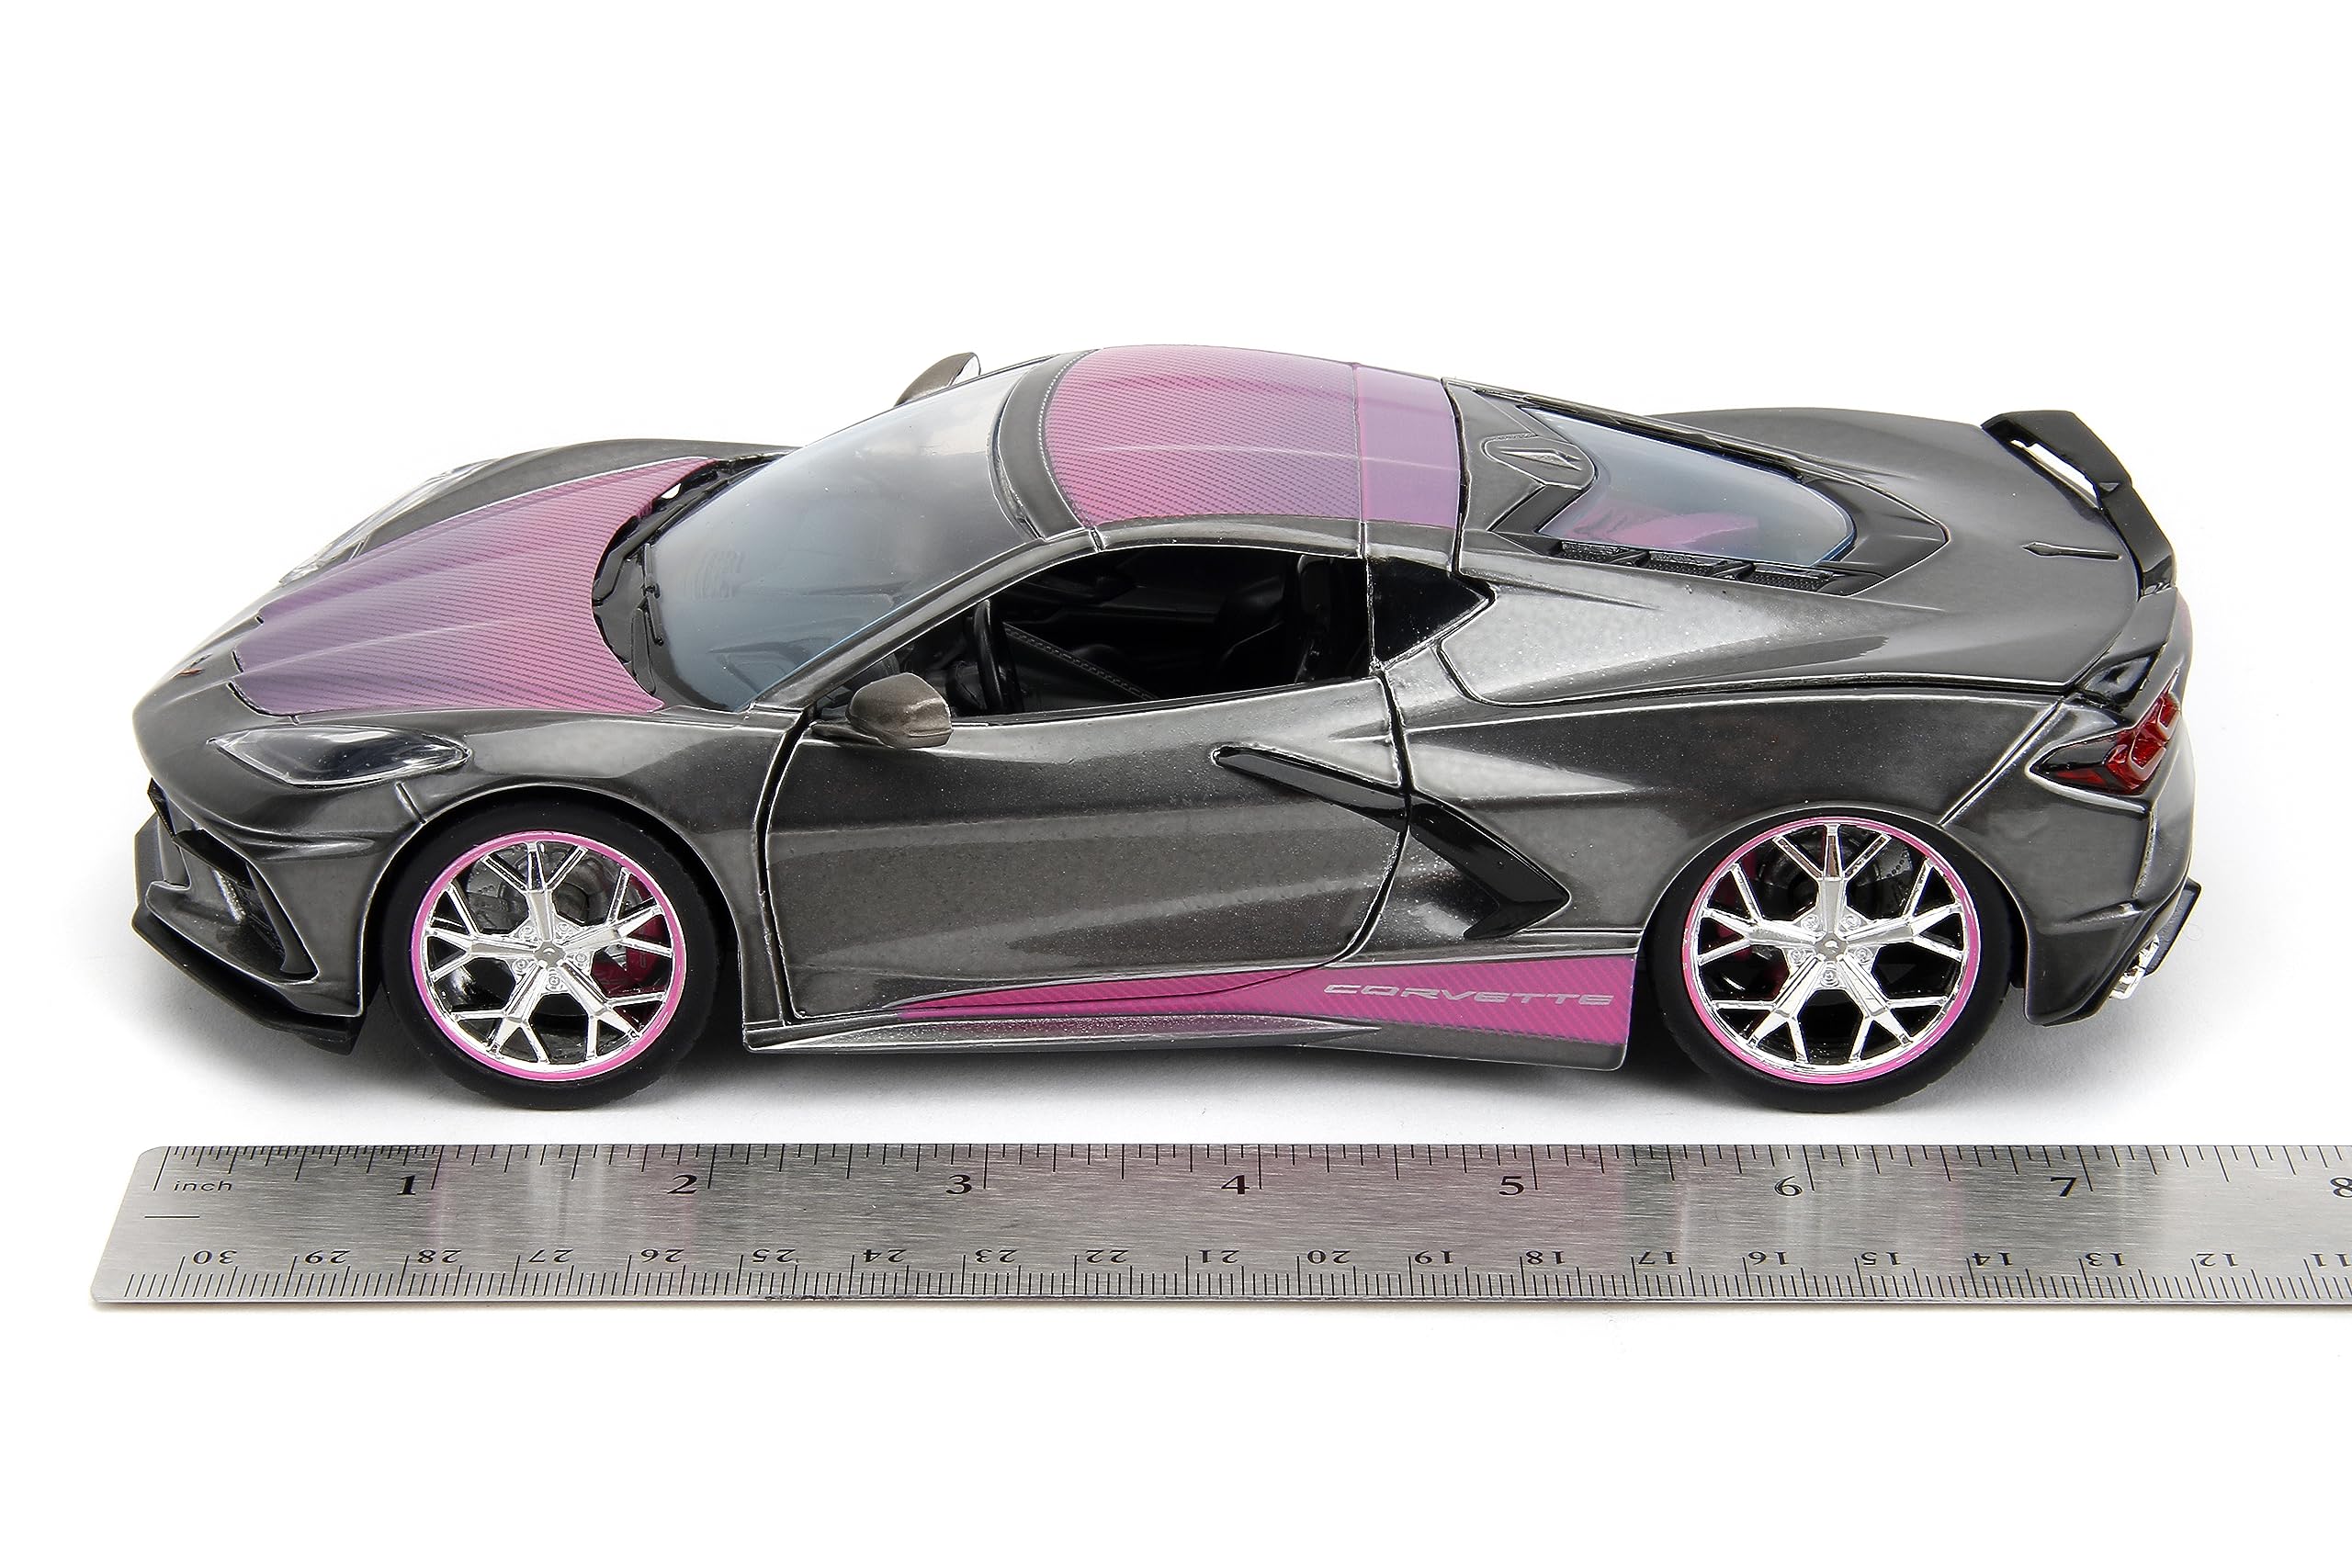 Pink Slips 1:24 2020 Chevy Corvette Stingray Die-Cast Car, Toys for Kids and Adults(Metallic Grey/Pink)